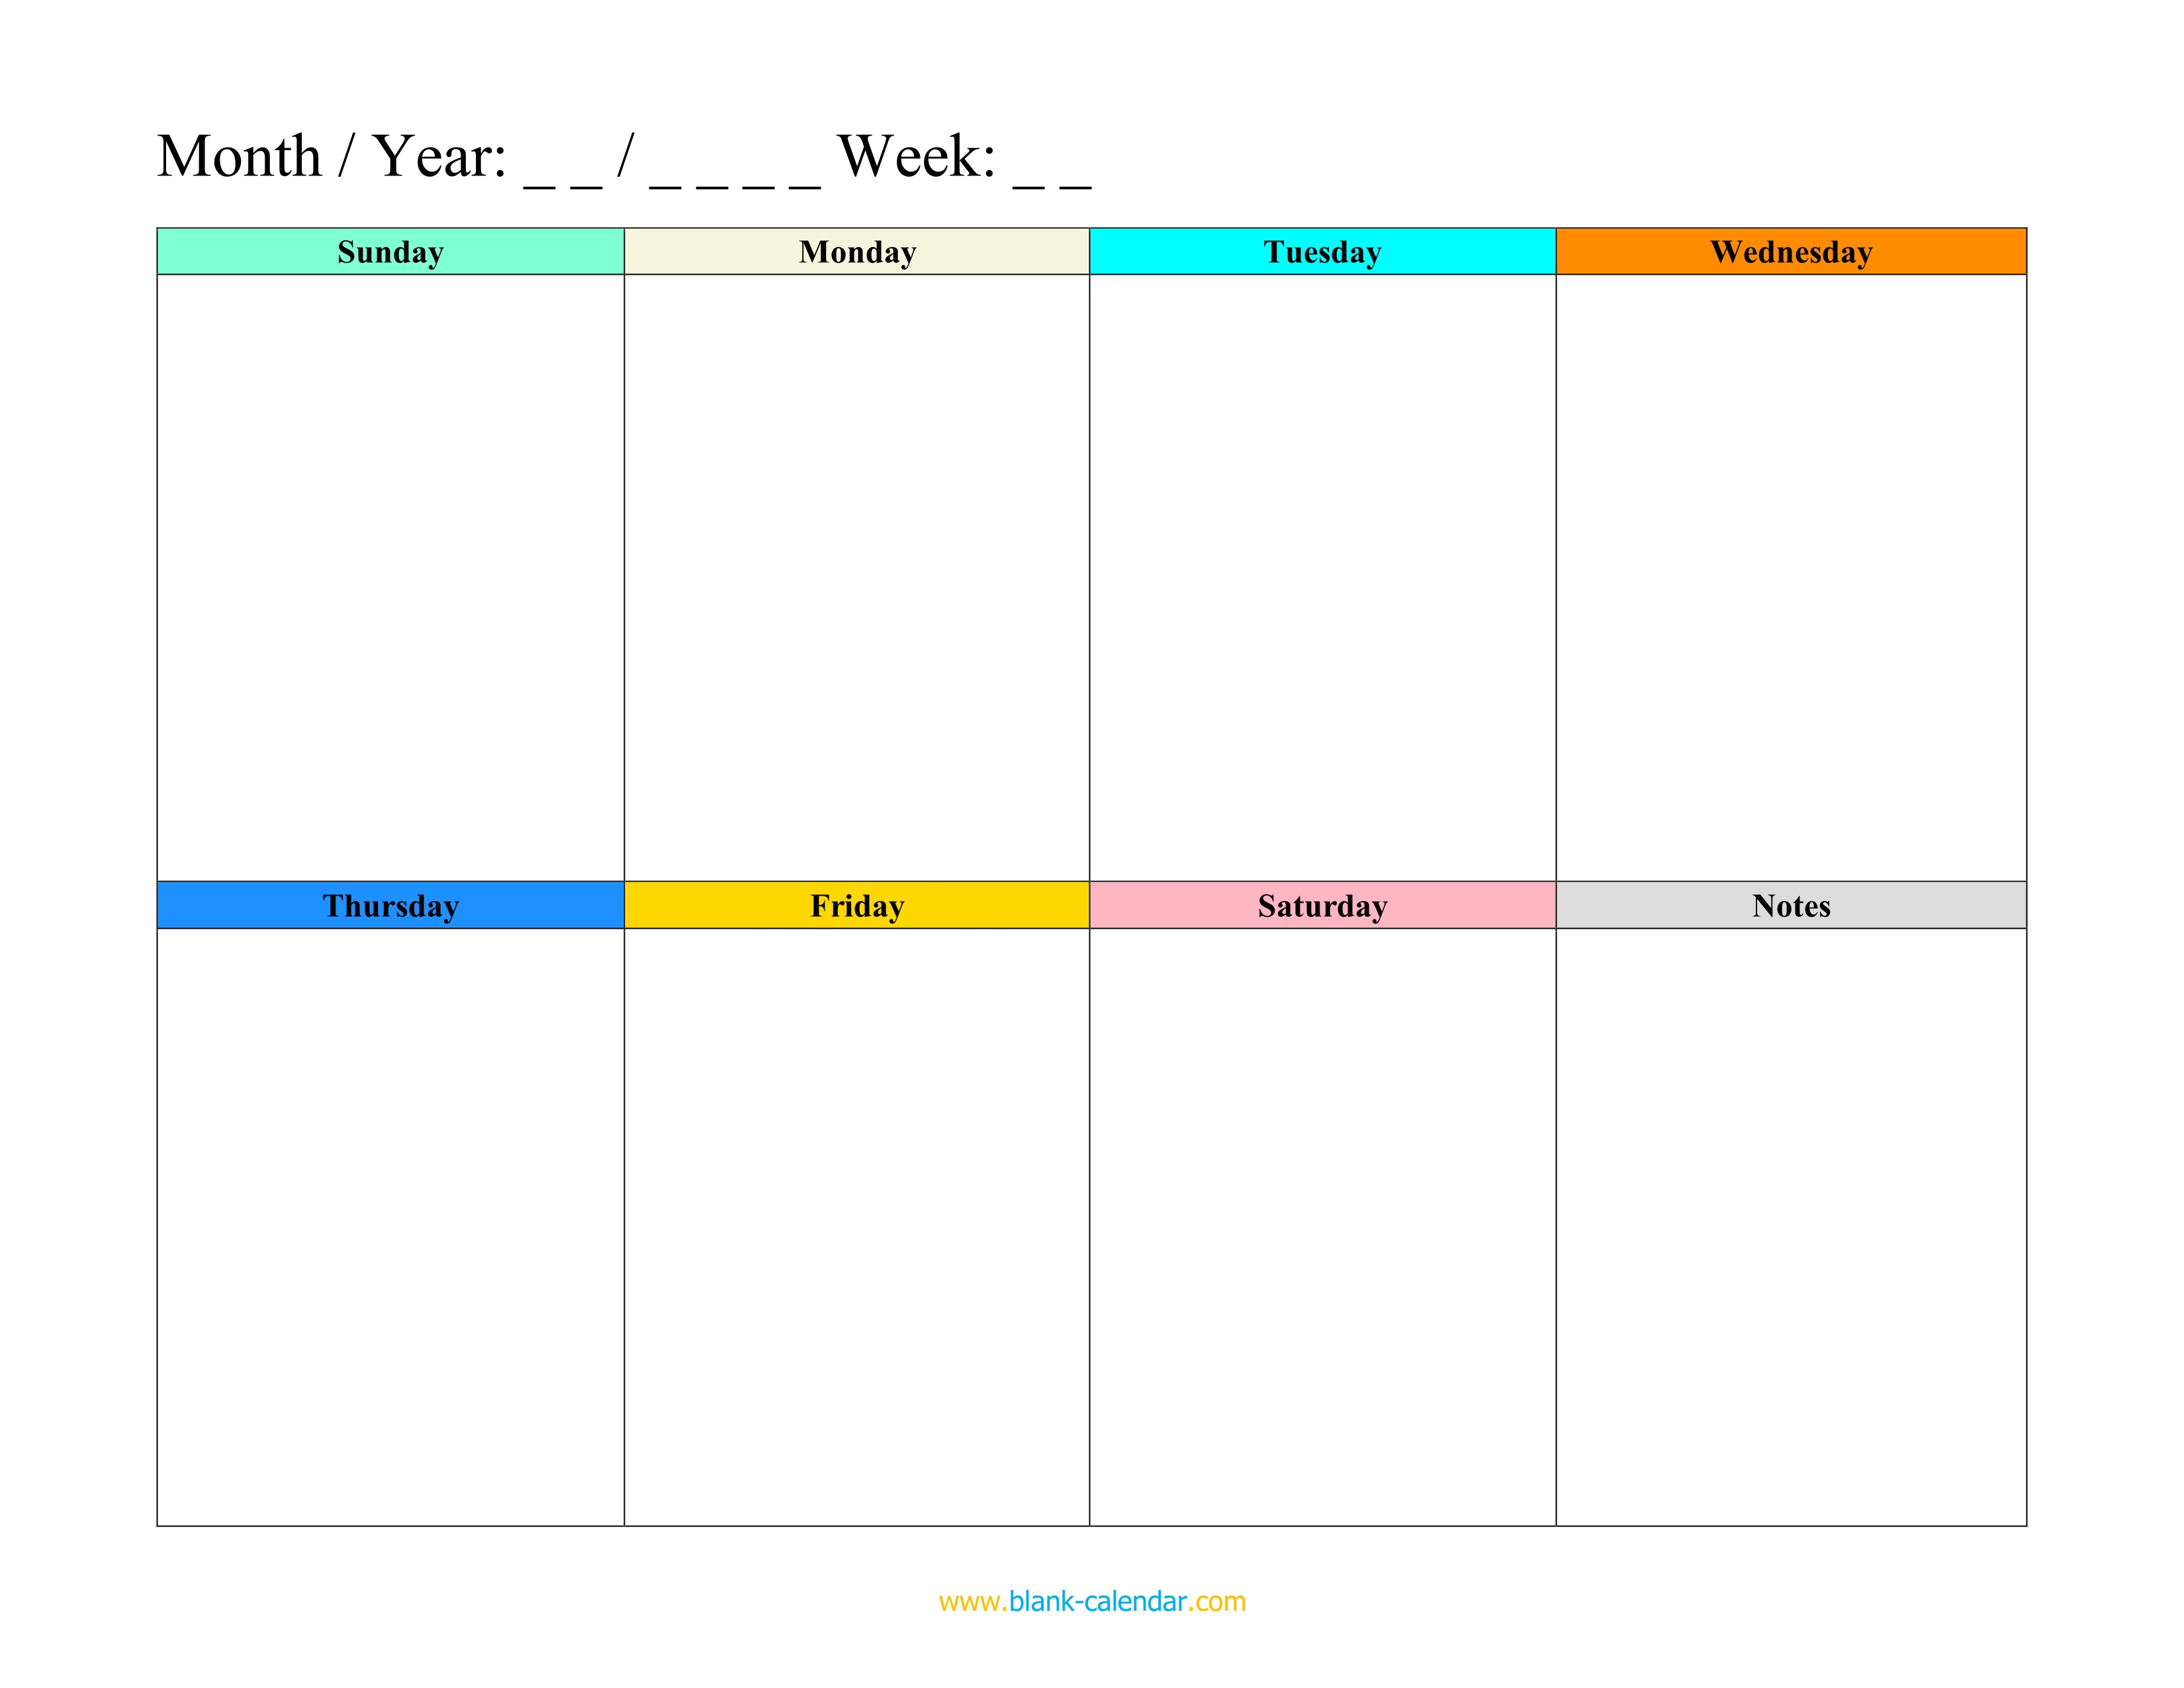 free-weekly-schedule-templates-for-word-images-and-photos-finder